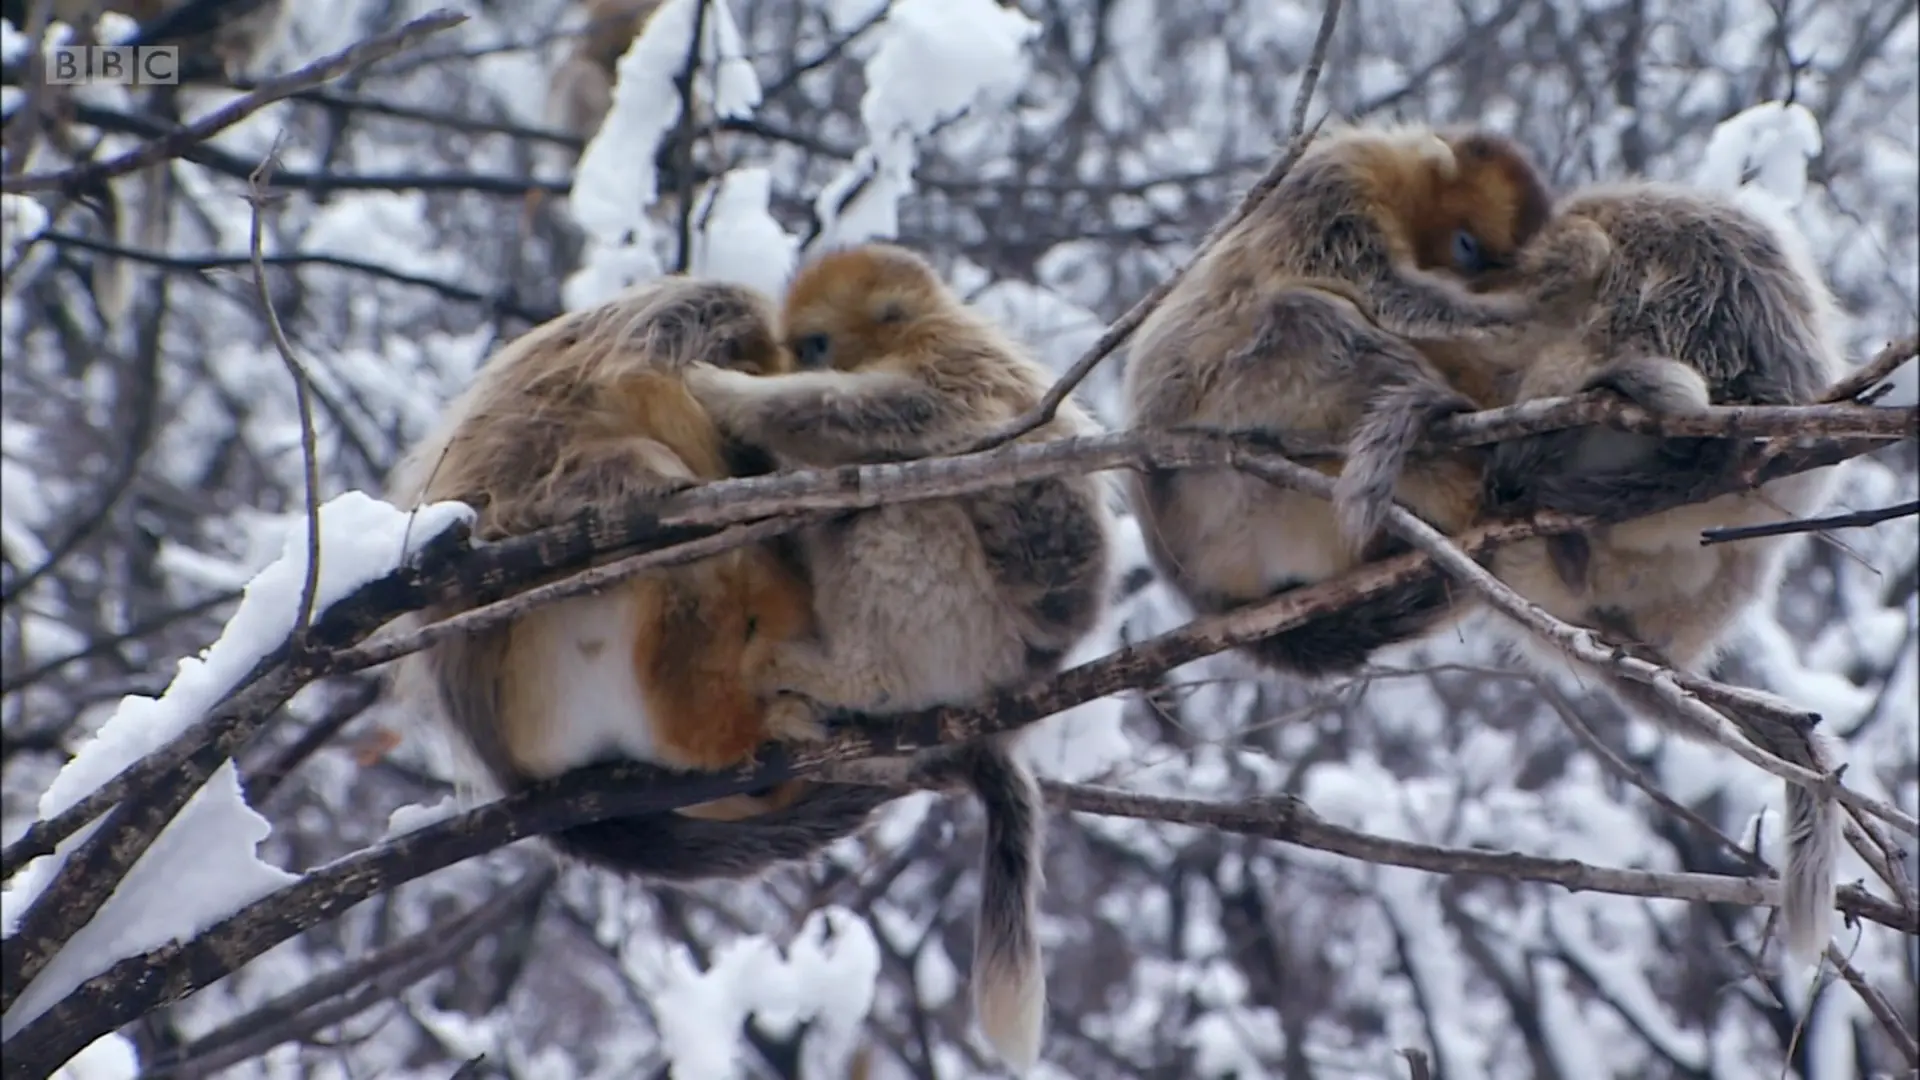 Qinling golden snub-nosed monkey (Rhinopithecus roxellana qinlingensis) as shown in Planet Earth - Mountains